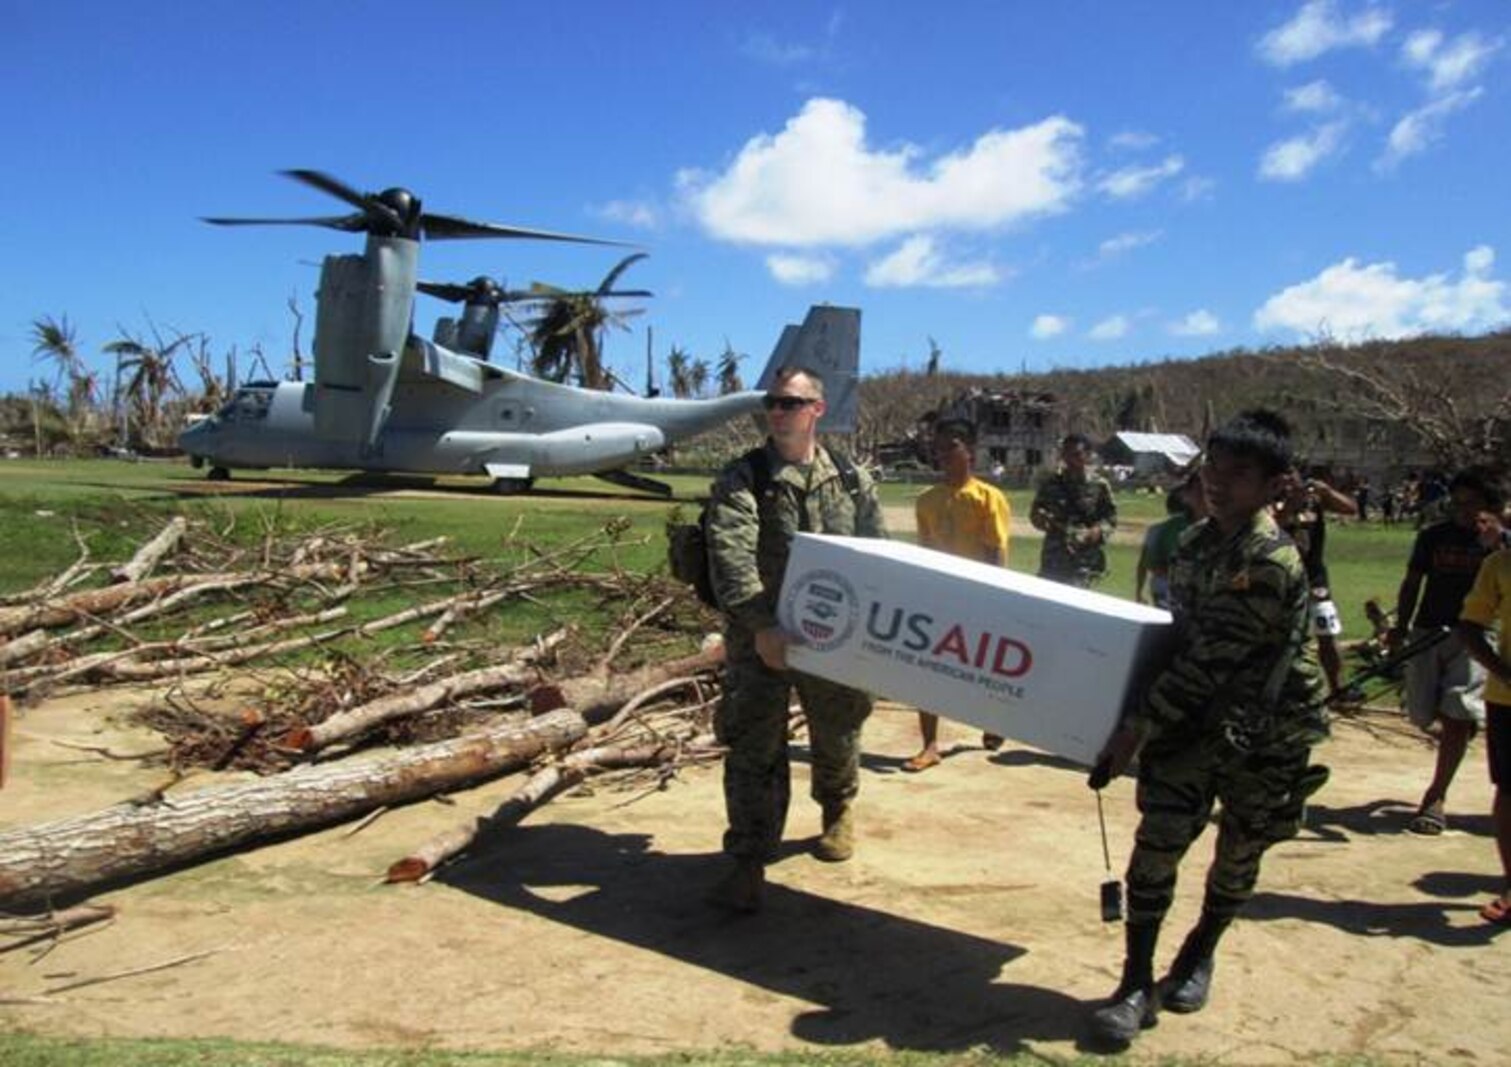 CA Marines work with the support of USAID and the Armed Forces of the Phillipines to deliver emergency supplies to those affected by typhoon Haiyan.